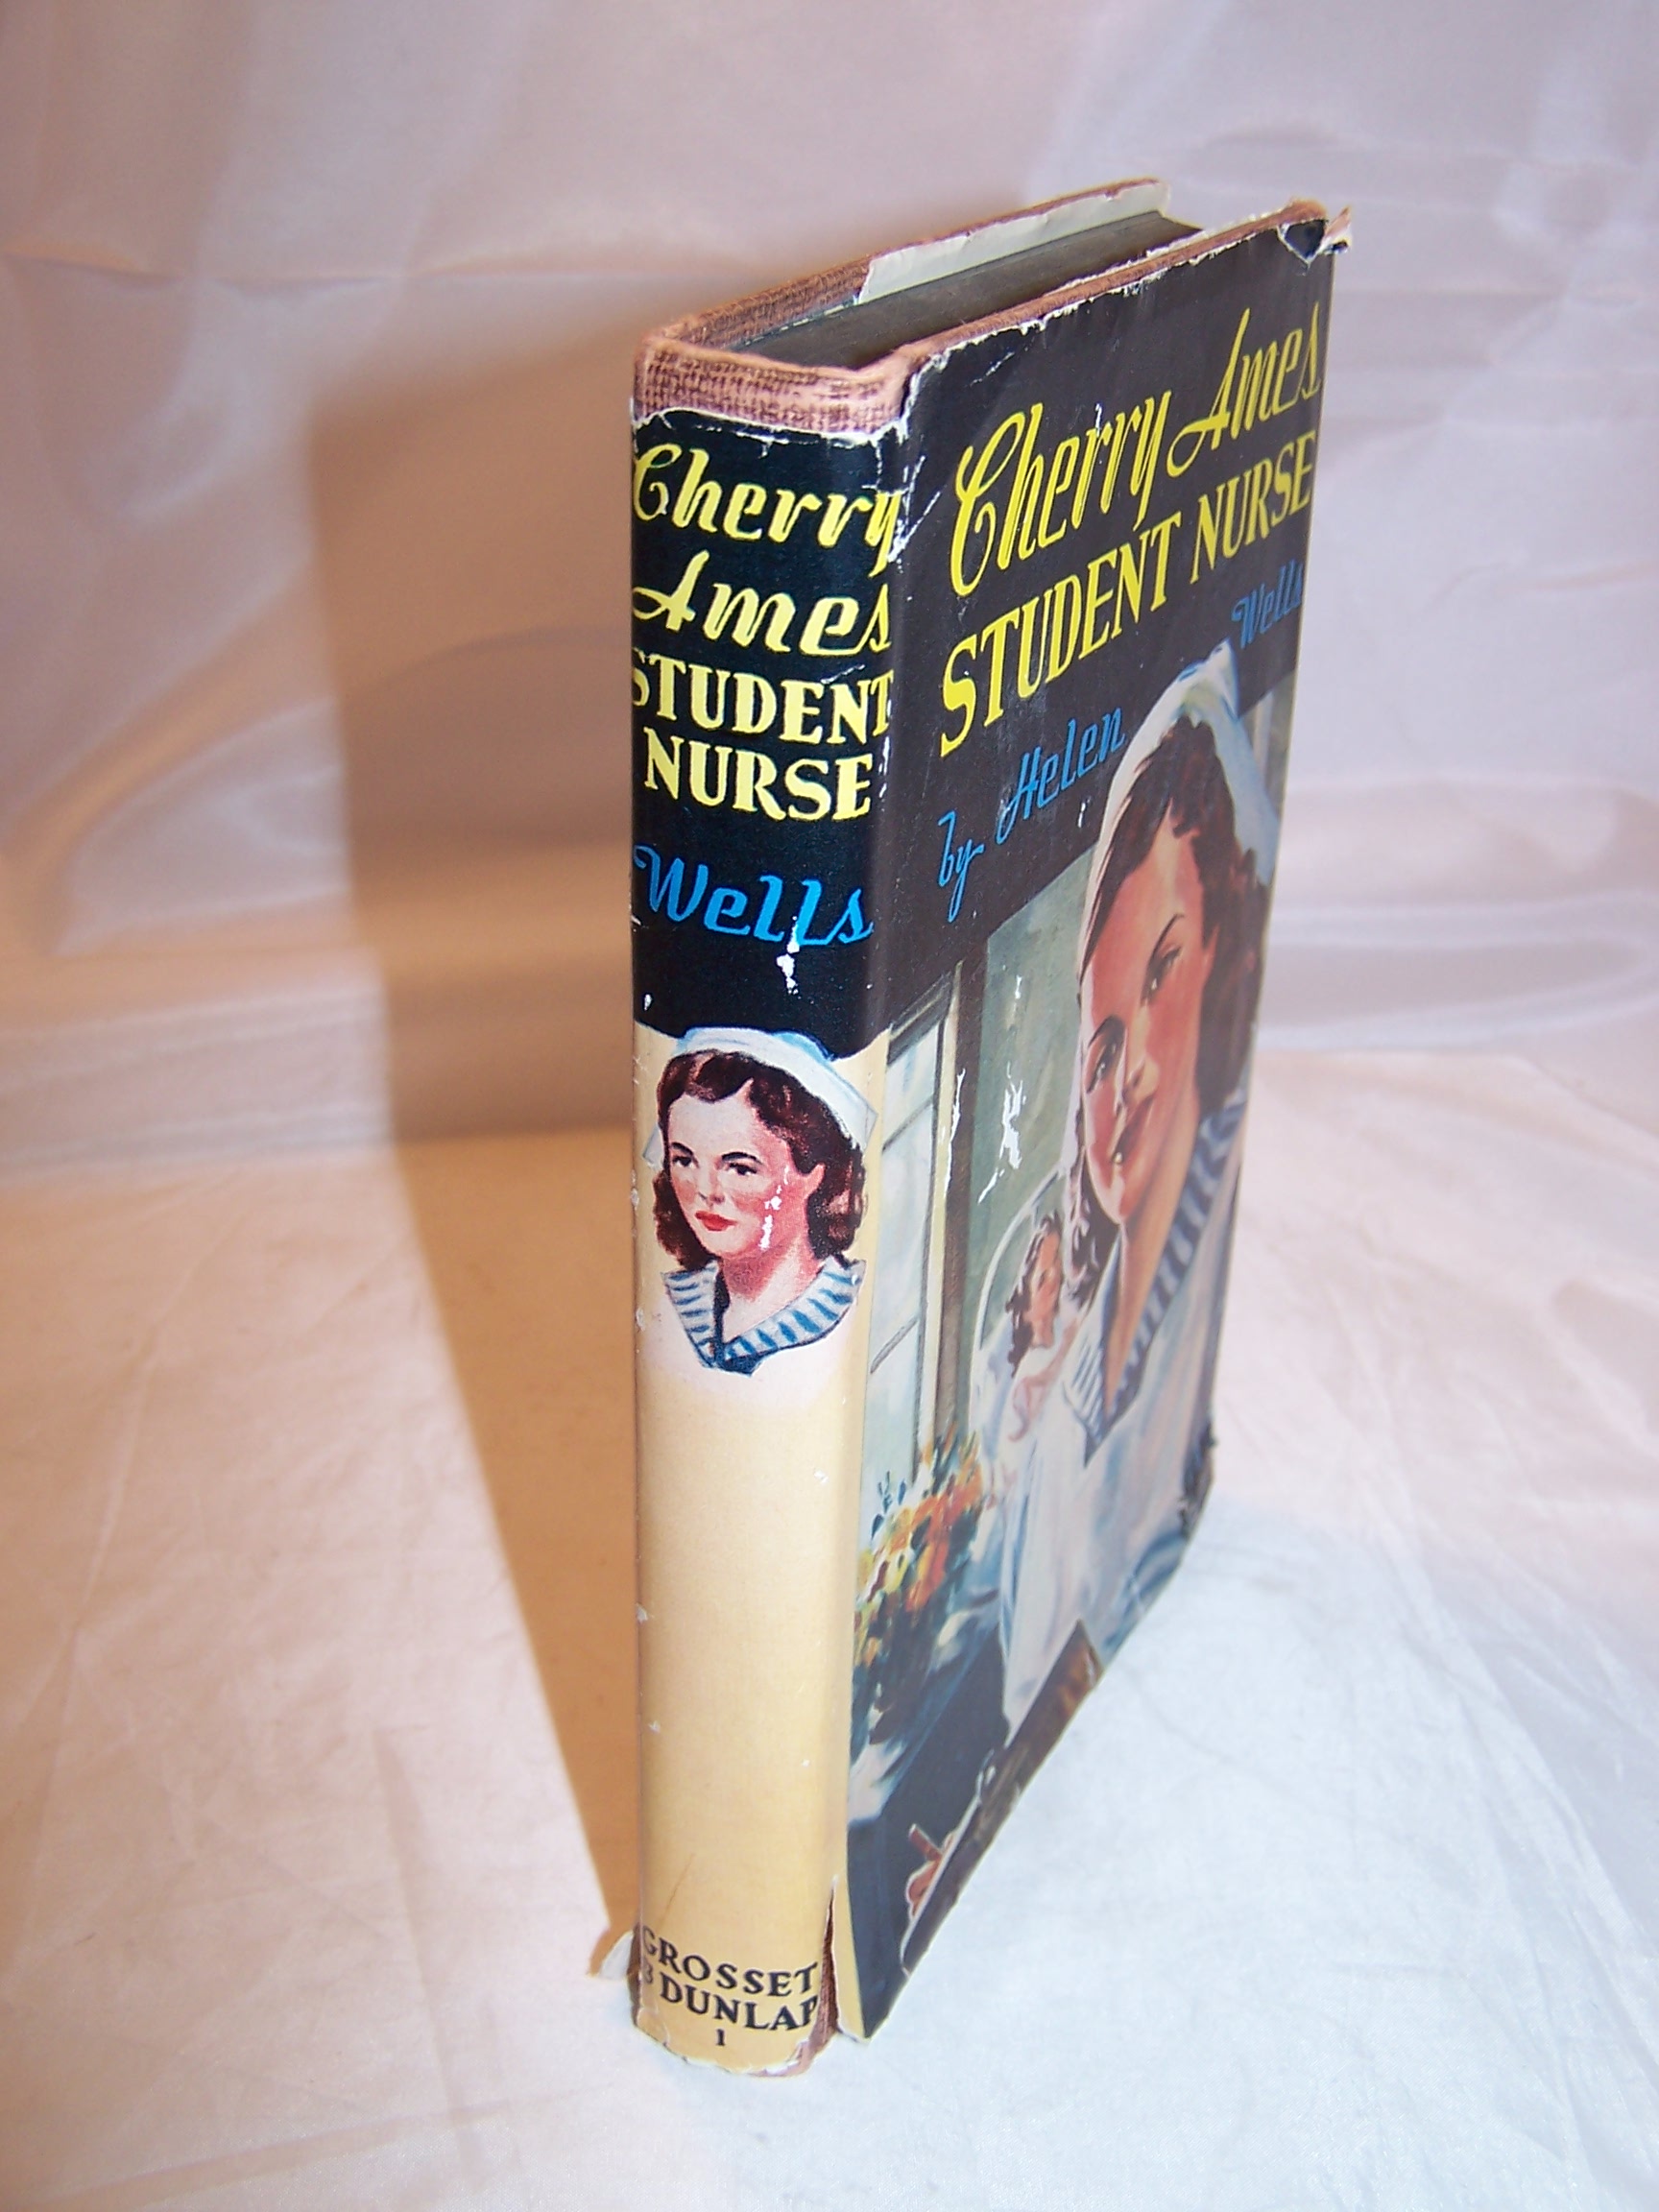 Yellow Book Cover Spine